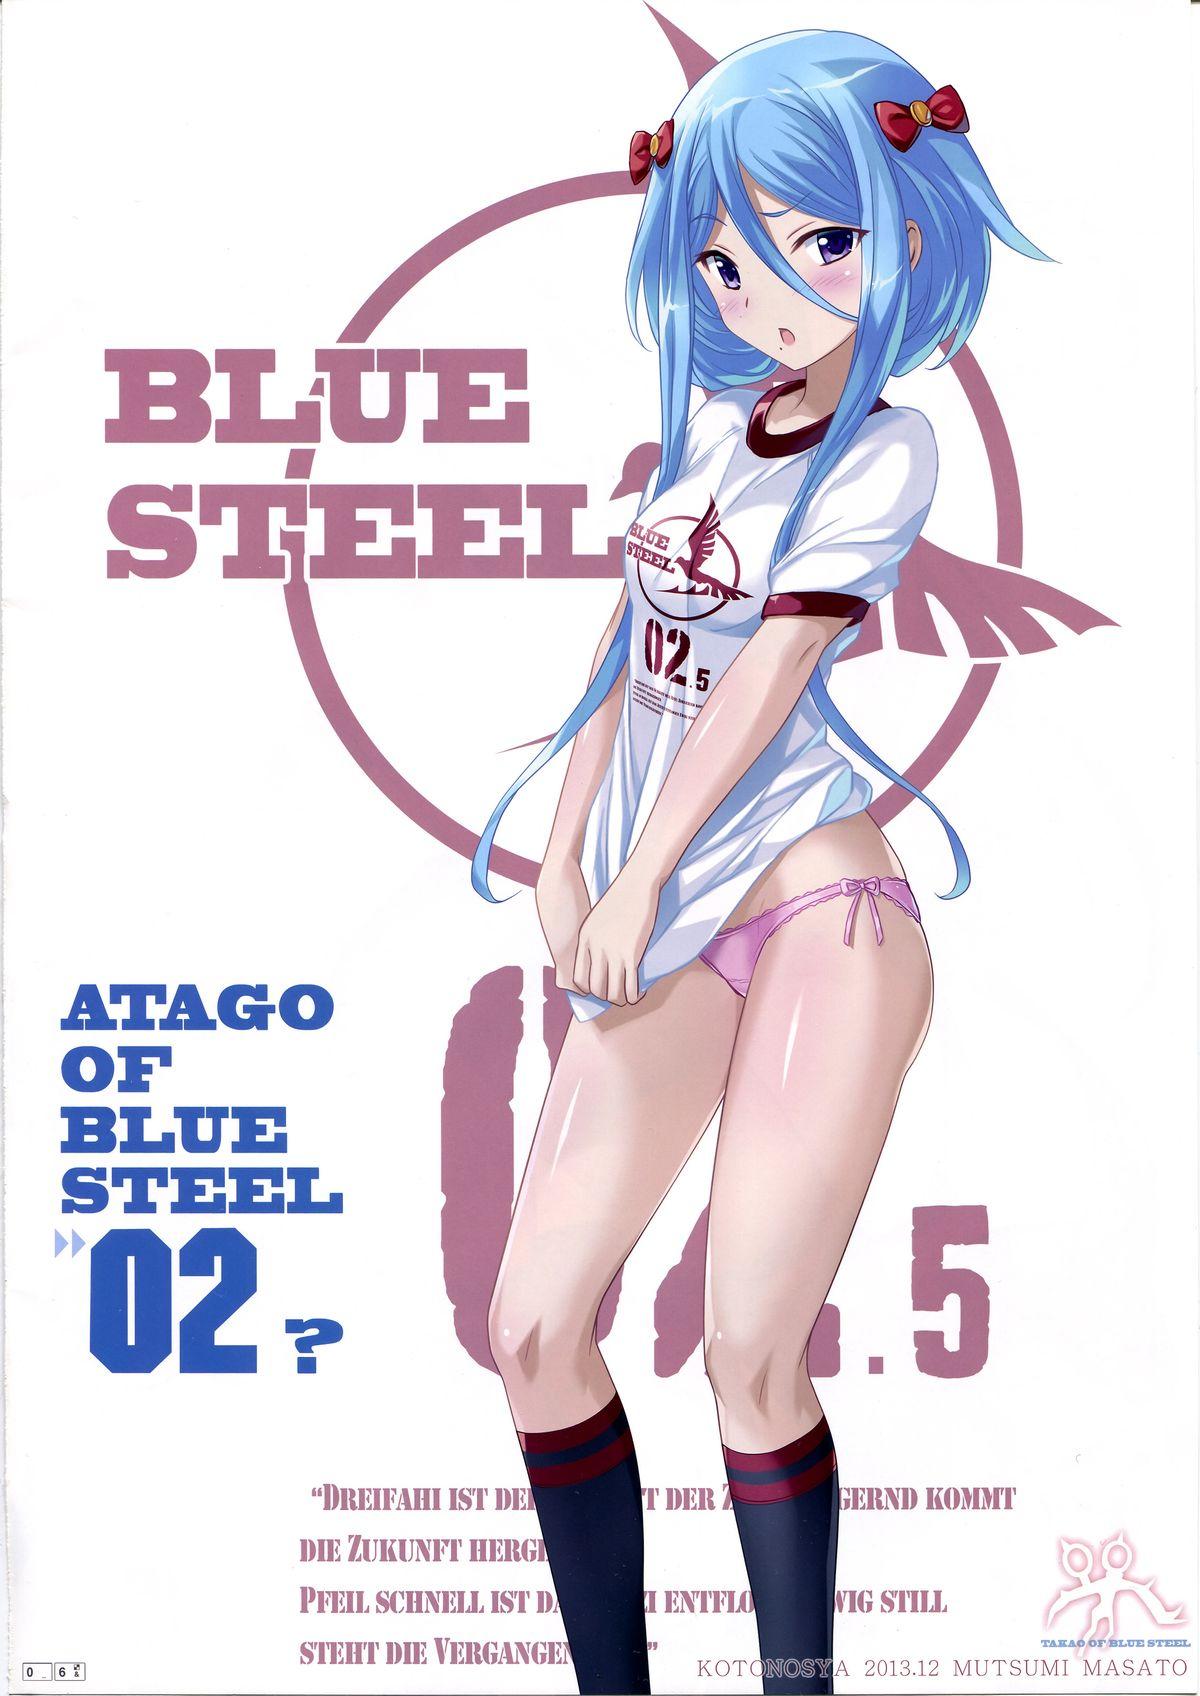 Putas TAKAO OF BLUE STEEL 02 - Arpeggio of blue steel Facefuck - Page 5